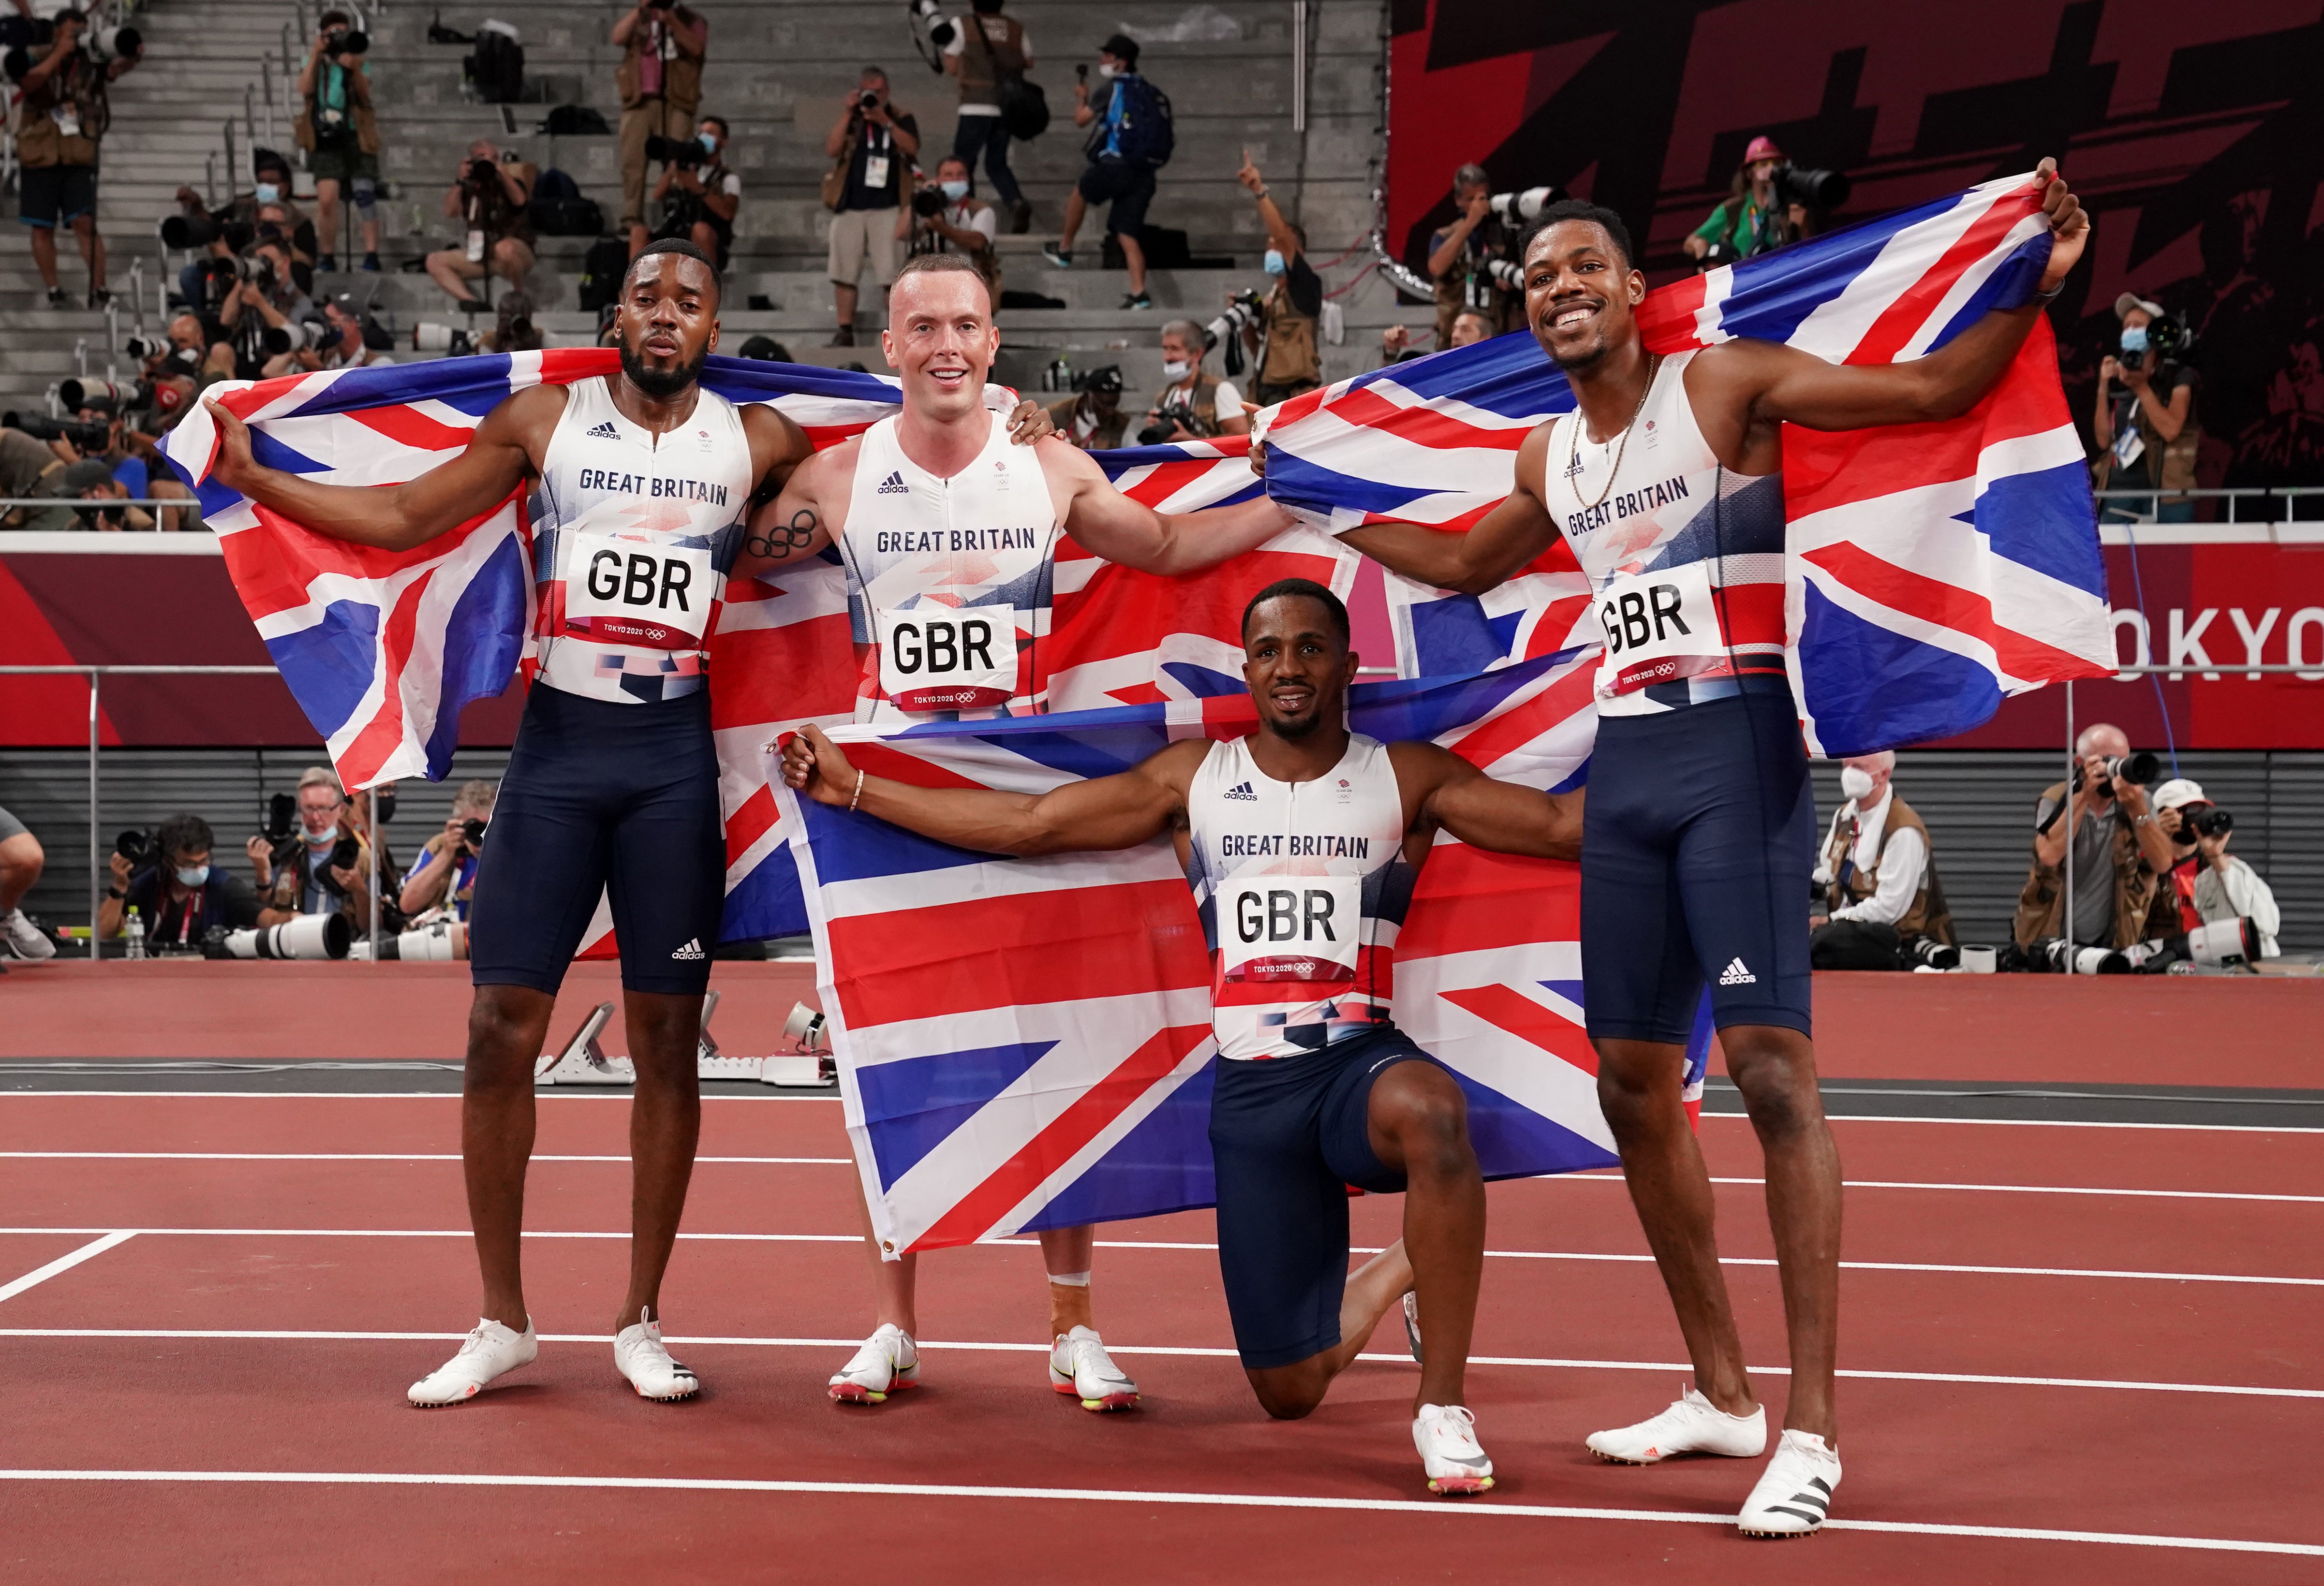 Great Britain’s Nethaneel Mitchell-Blake, Richard Kilty, Ujah and Zharnel Hughes (l-r) after the men’s 4x100m relay final